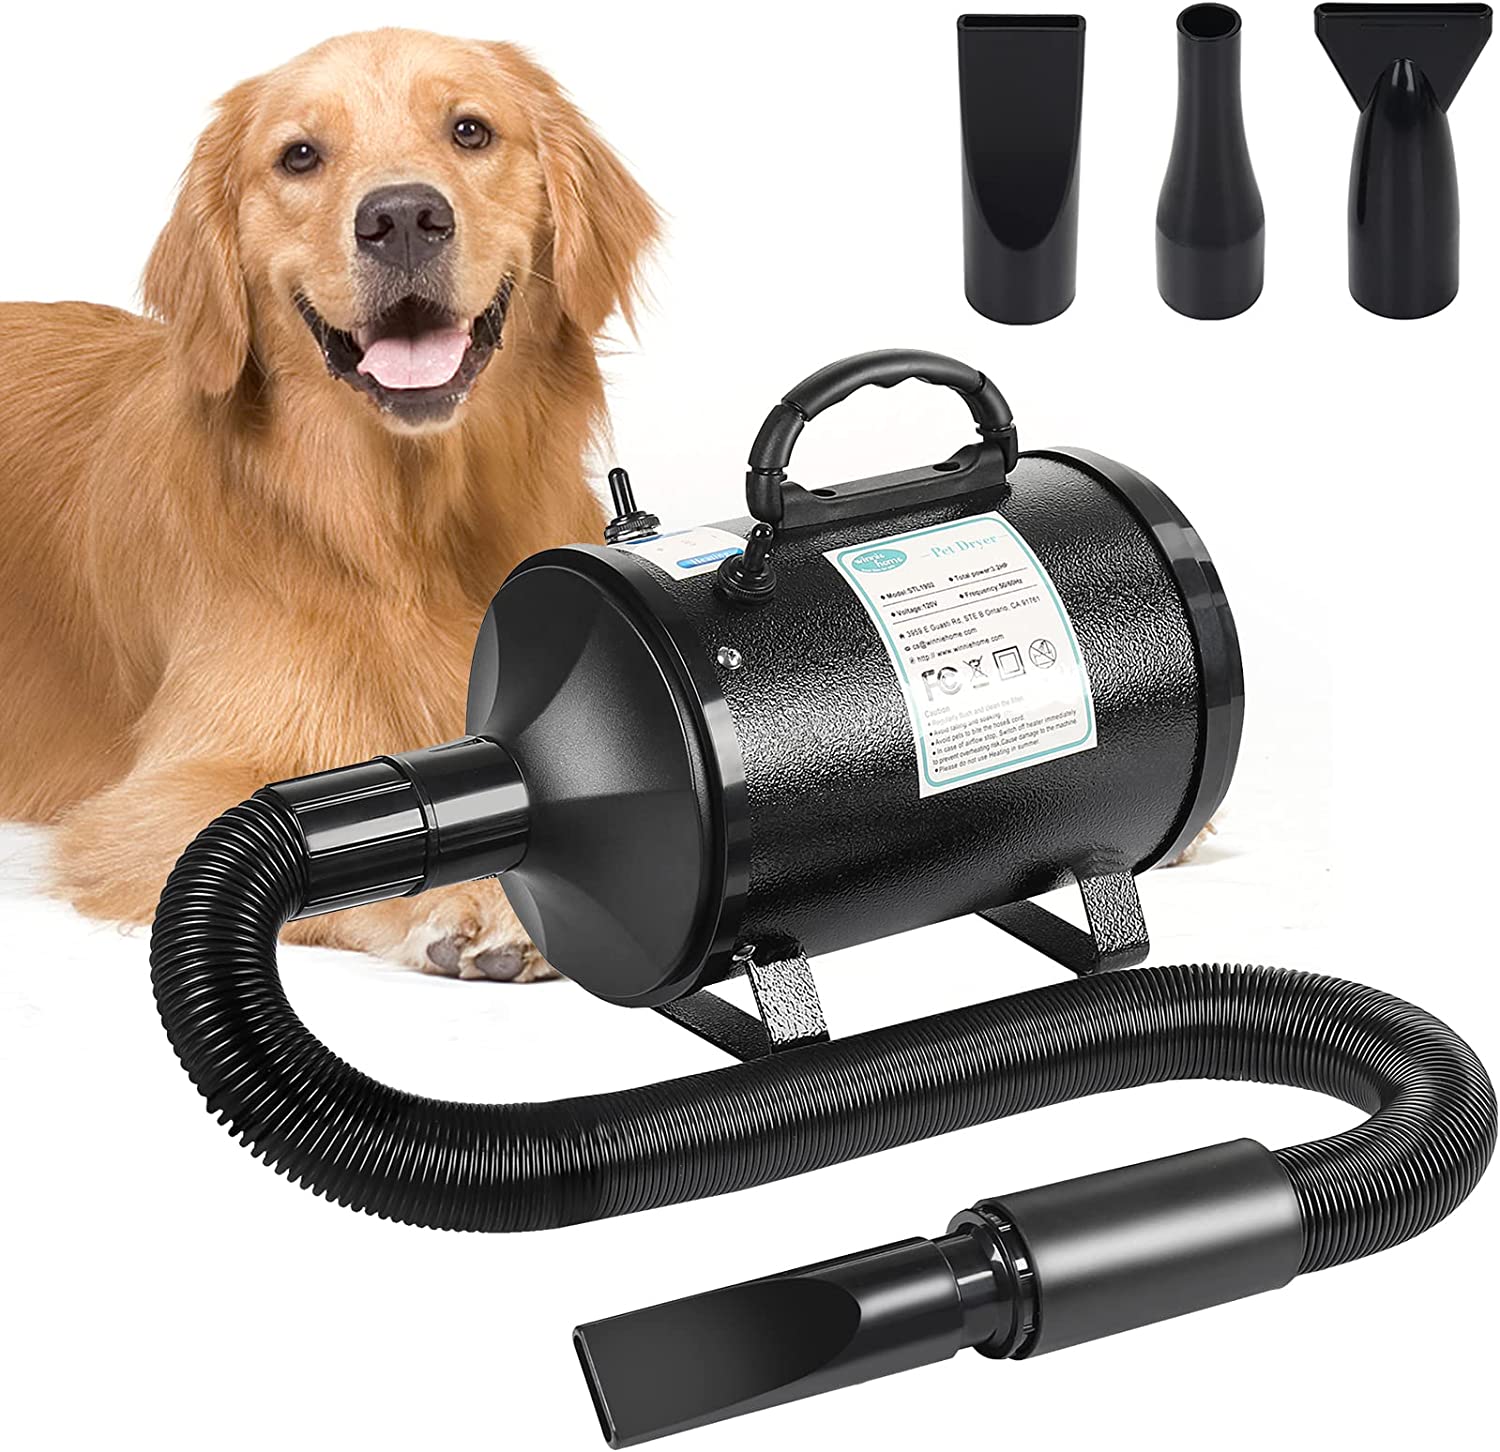 Find out how to invest in a very good dog grooming dryer on the web.